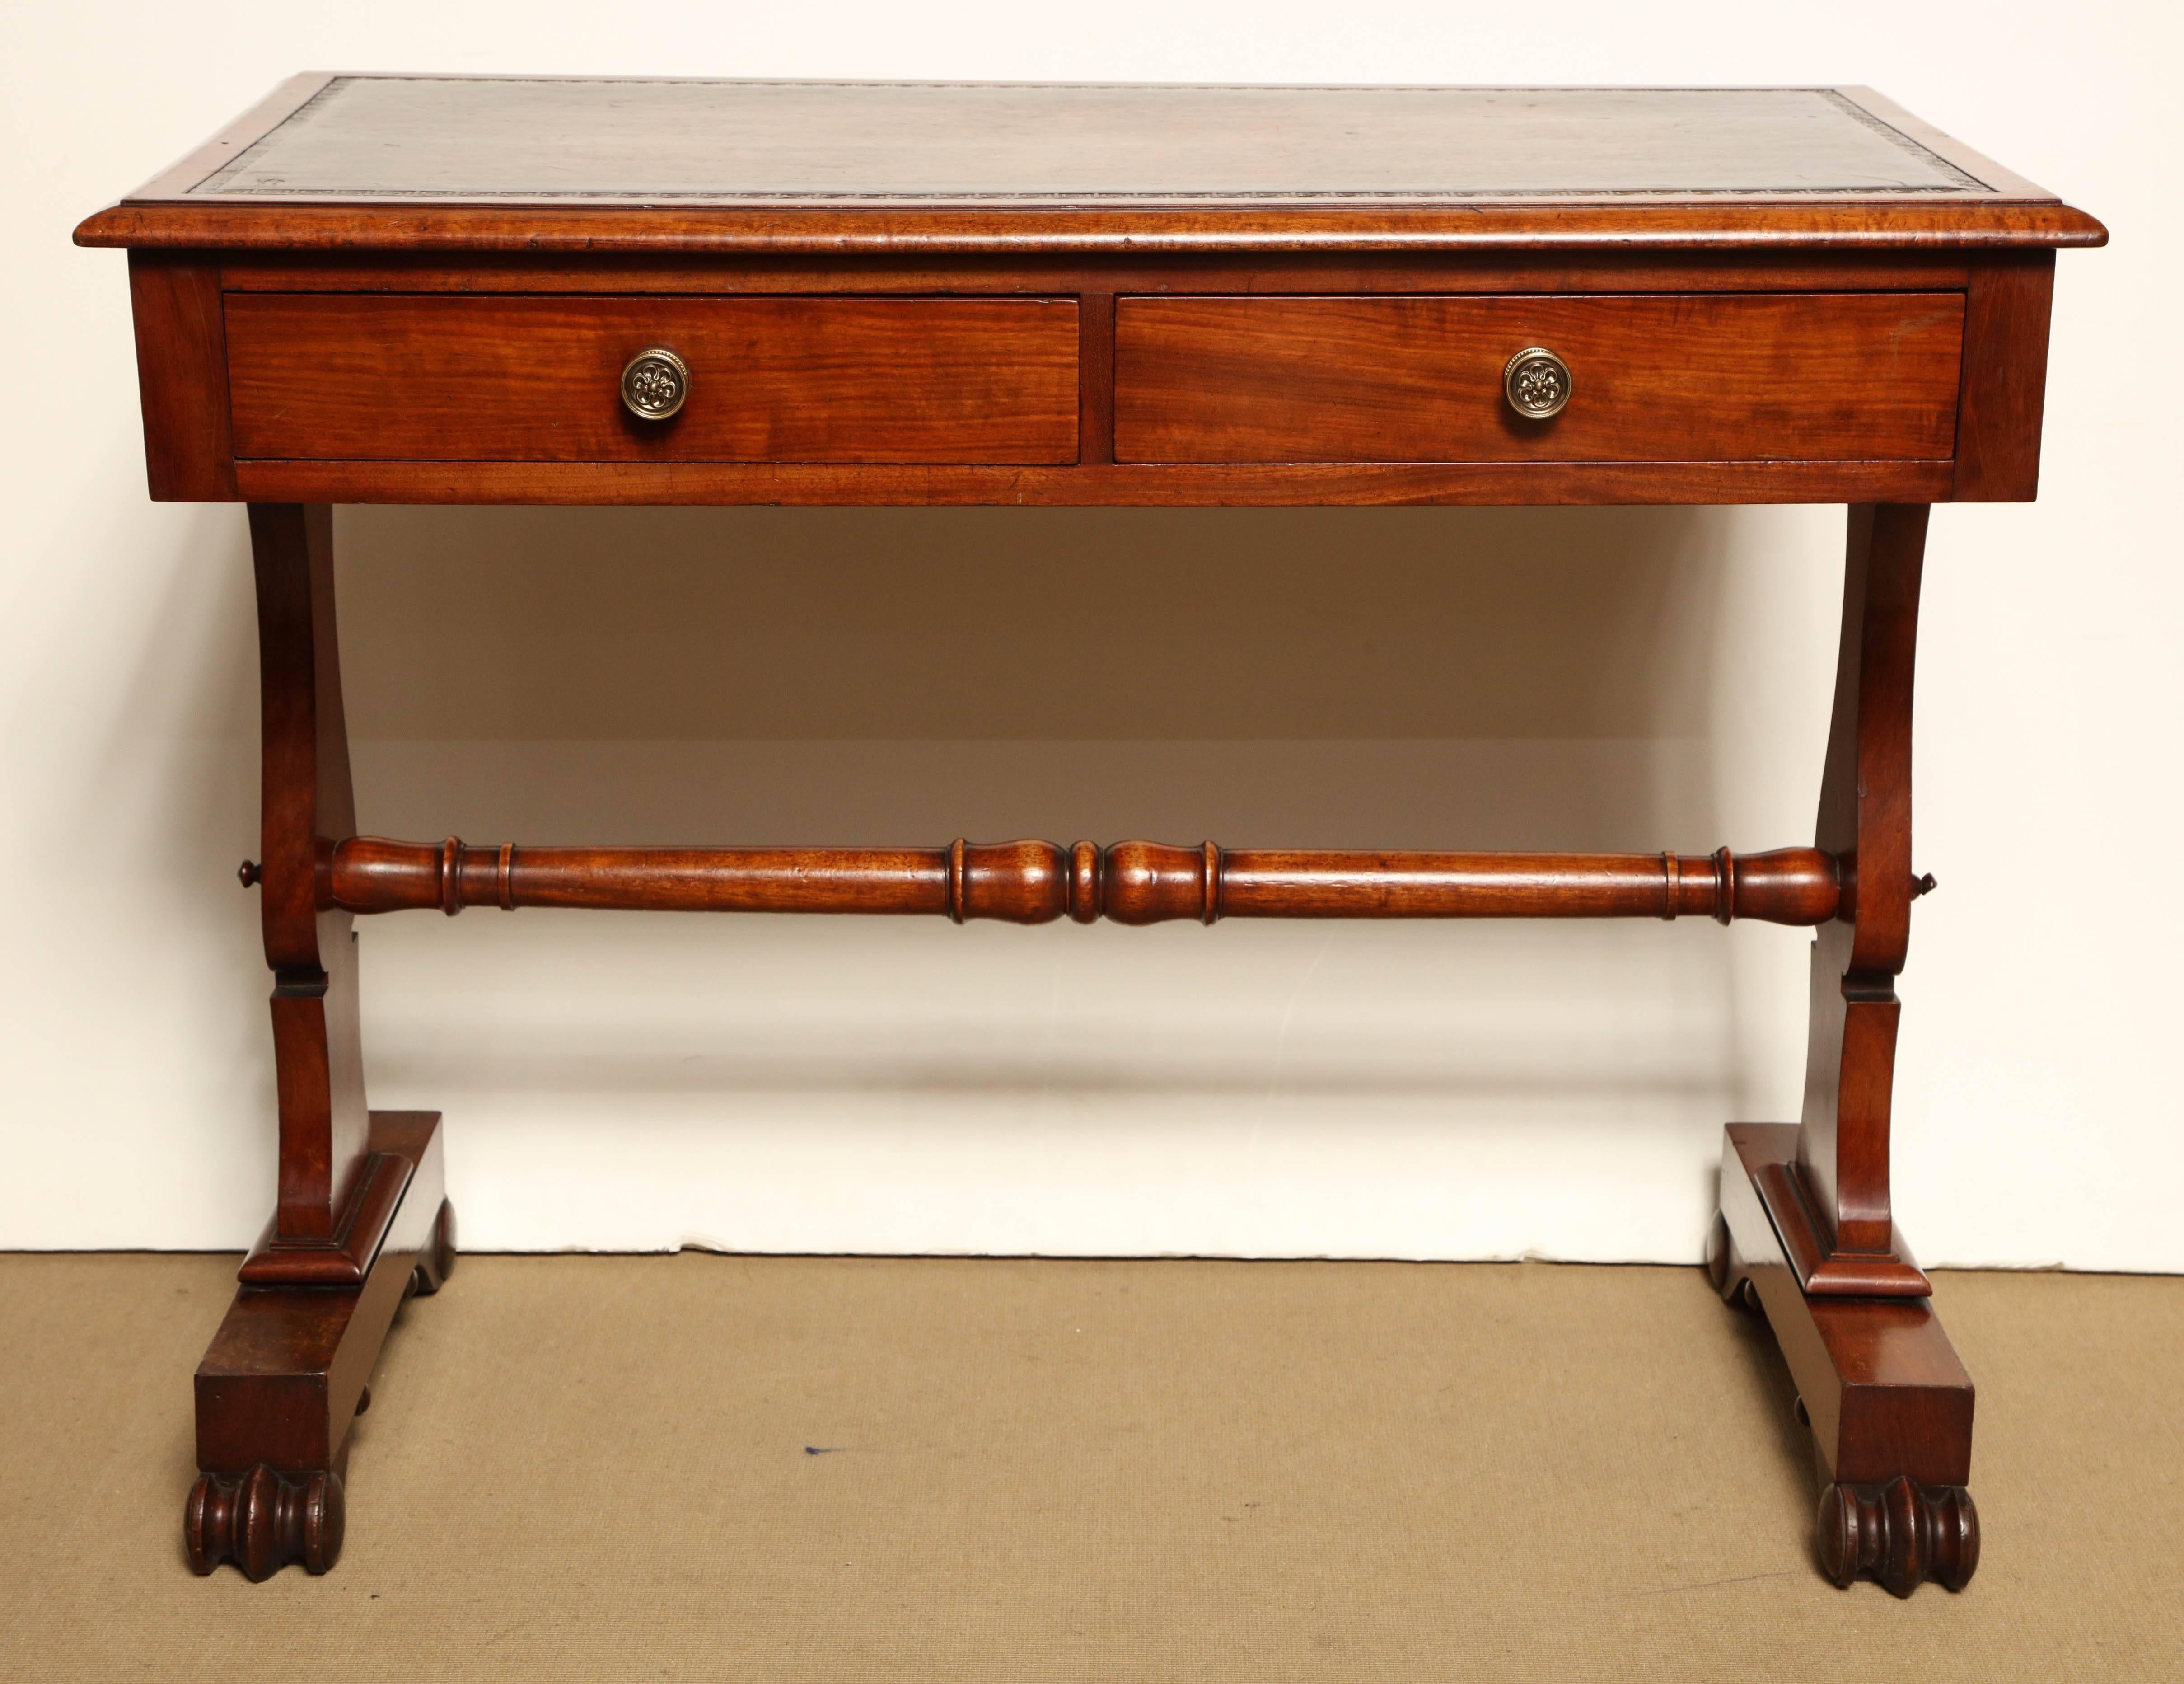 Mid-19th century English, mahogany and leather top desk.